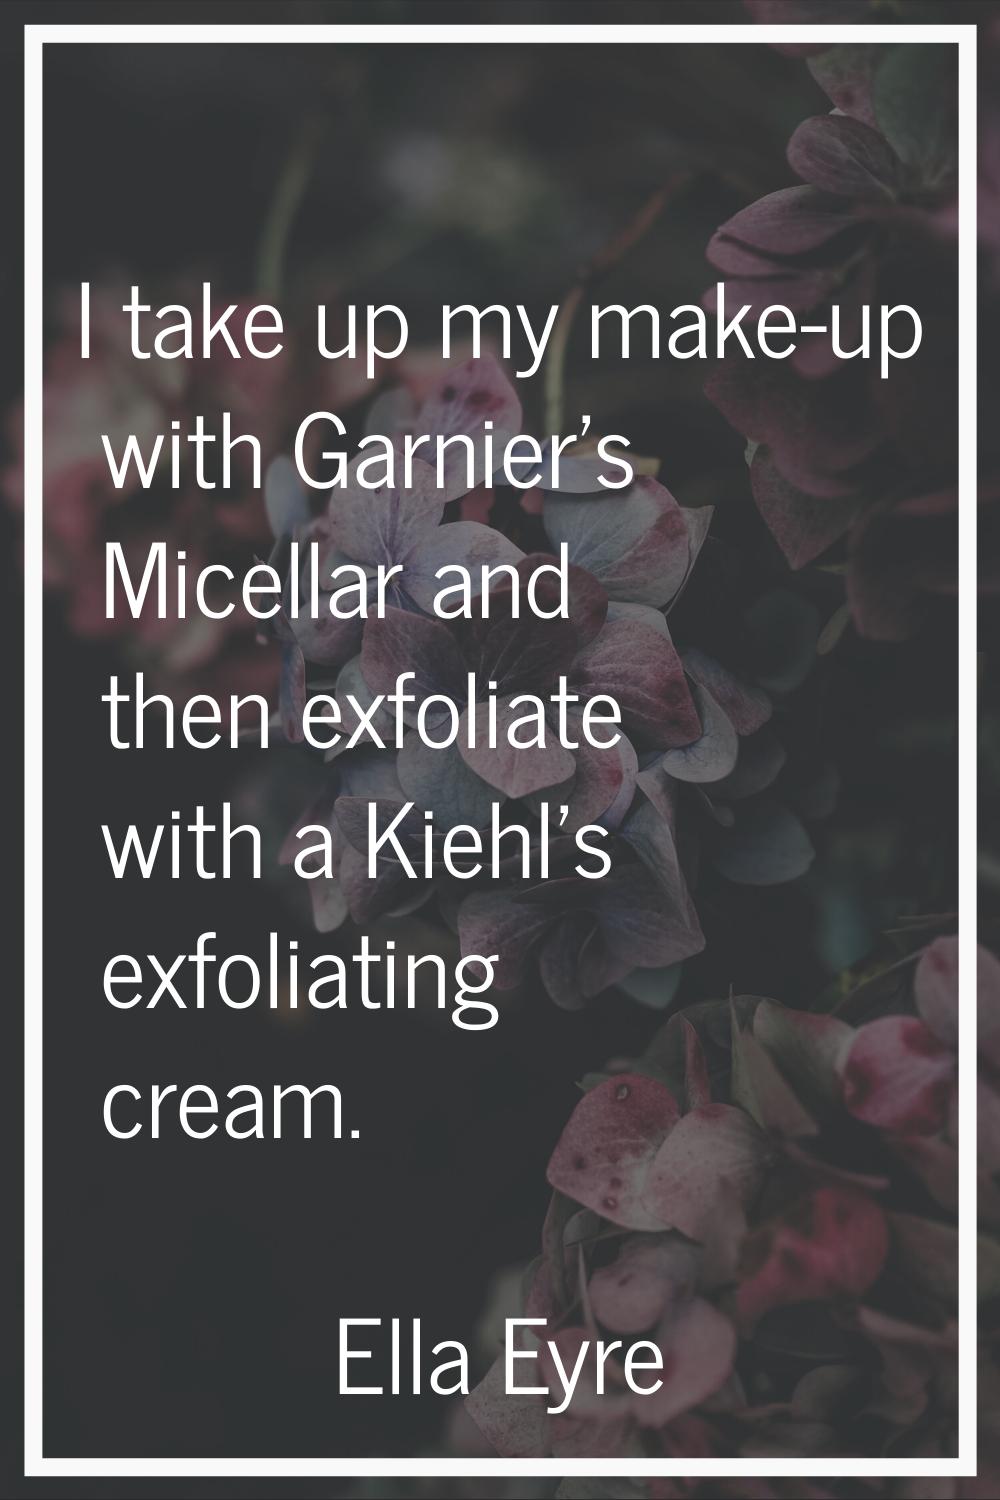 I take up my make-up with Garnier's Micellar and then exfoliate with a Kiehl's exfoliating cream.